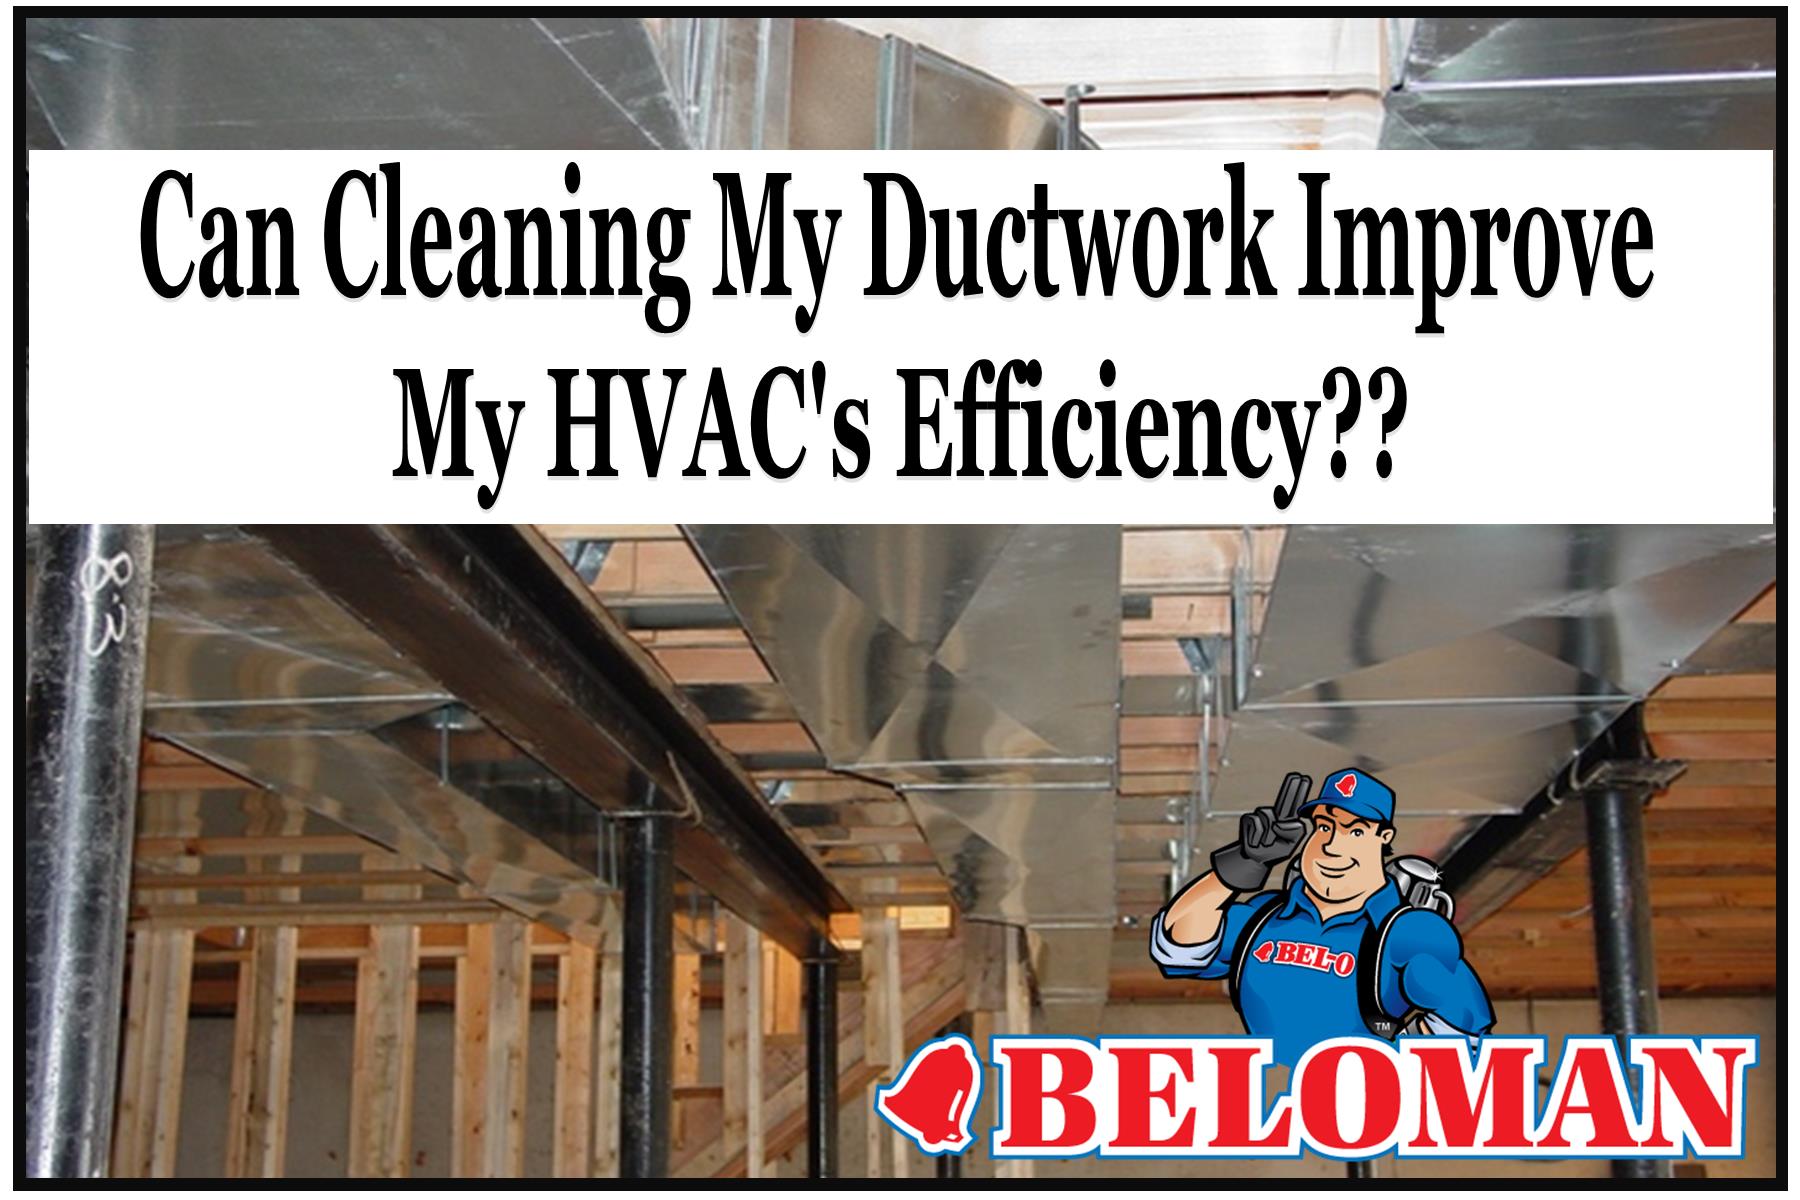 b-66-duct-cleaning-help-efficiency